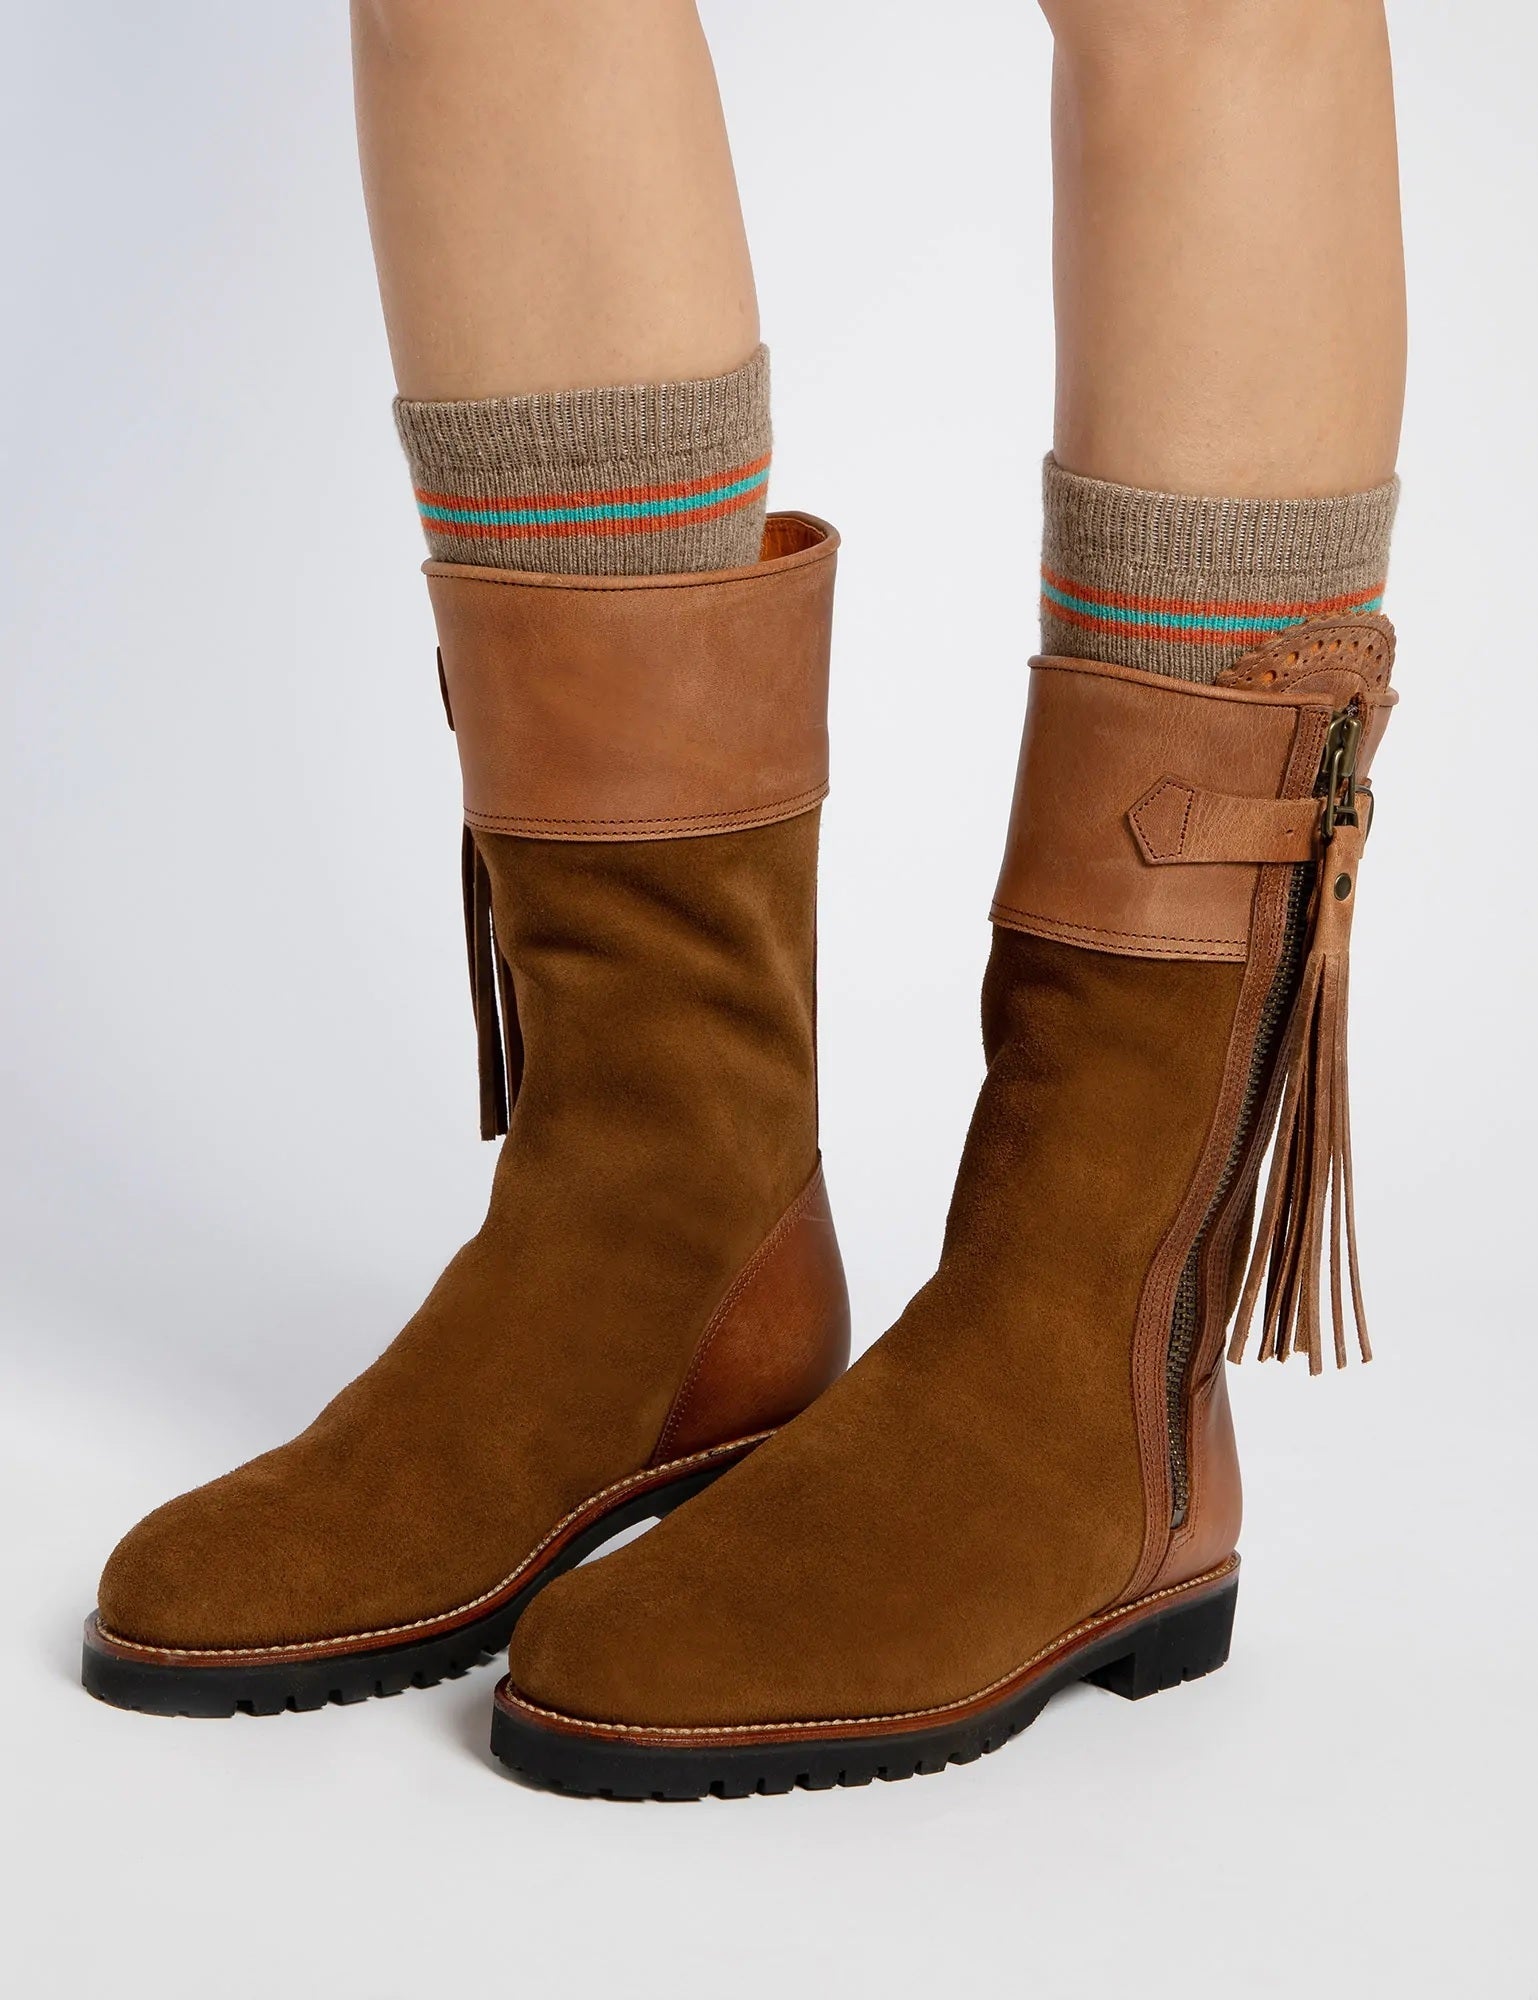 40% OFF PENELOPE CHILVERS Inclement Midcalf Tassel Boots - Womens – Tan - Size: UK 7 (EU40)